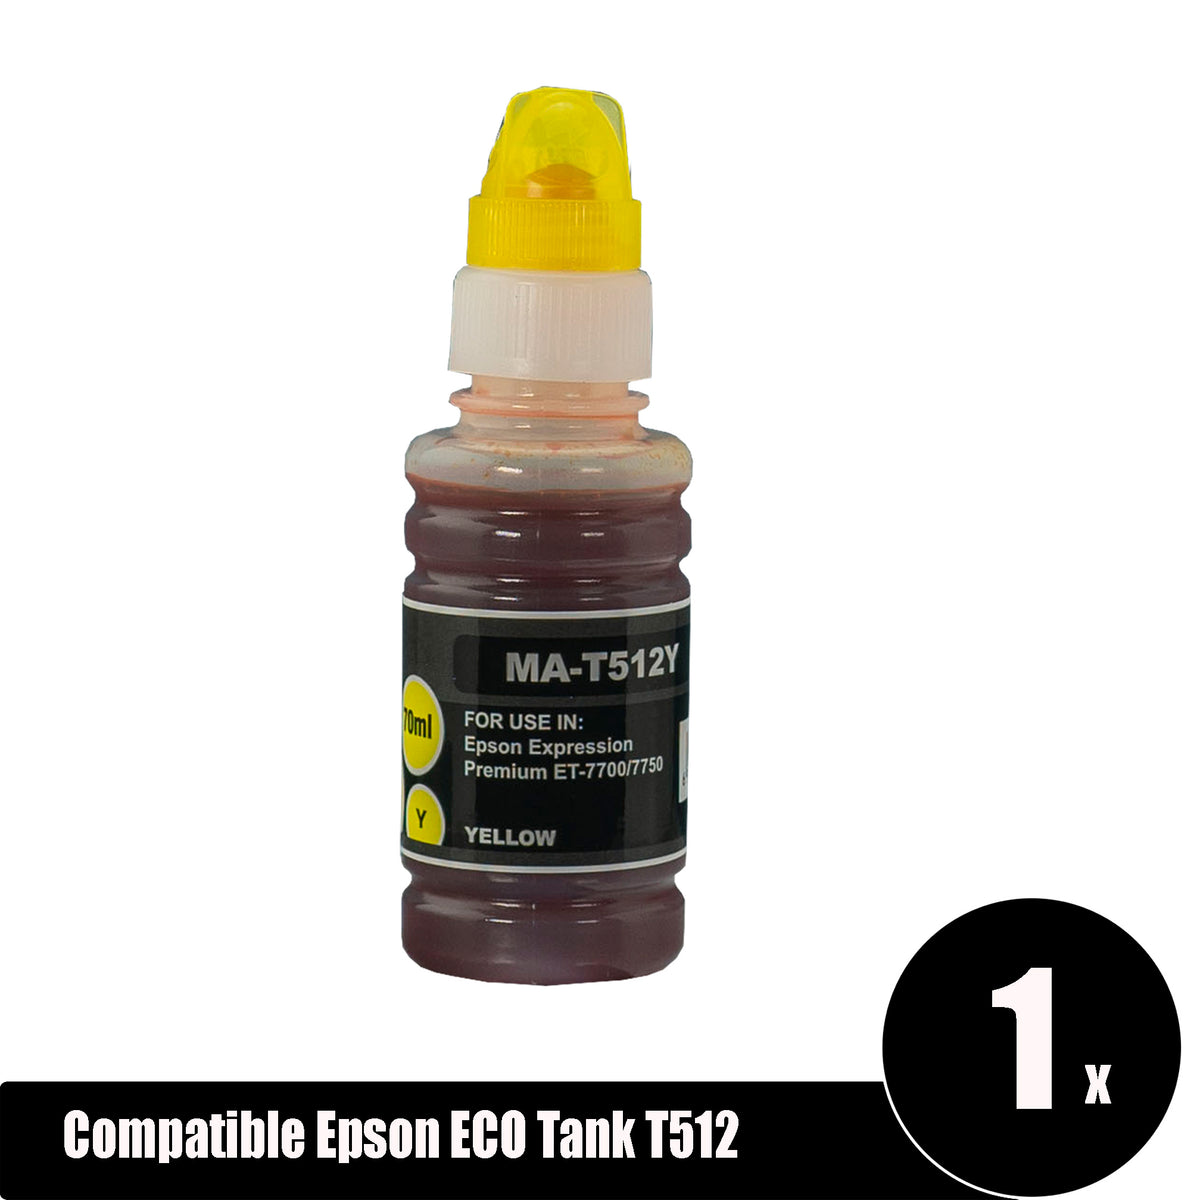 Compatible Epson ECO Tank T512 Yellow Ink